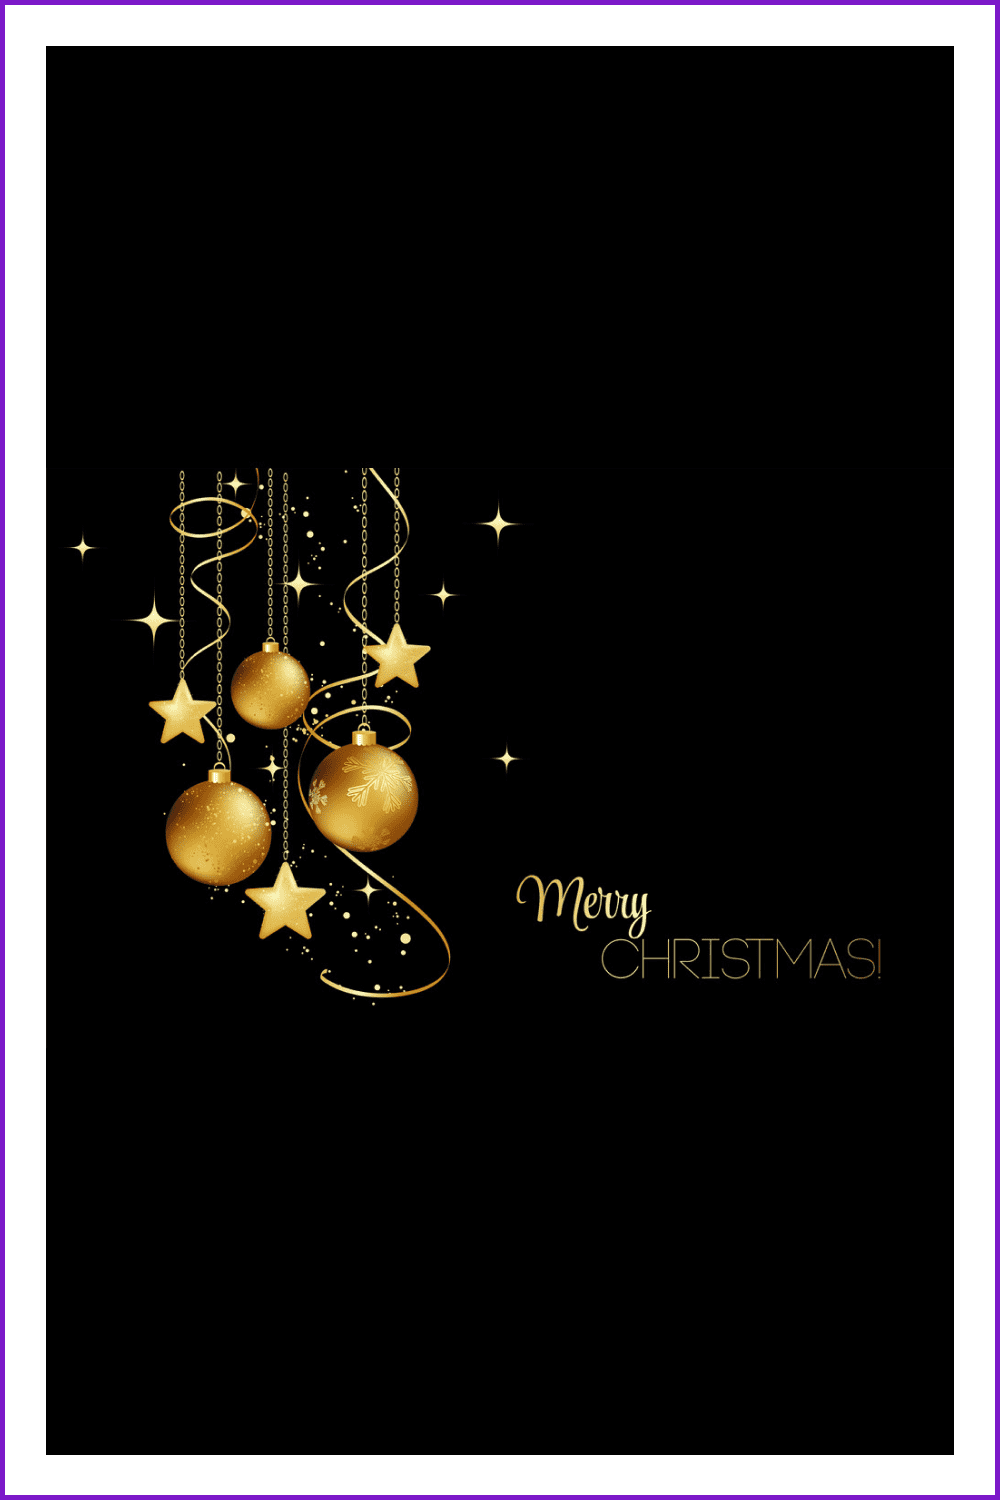 Image of gold Christmas toys on a black background.